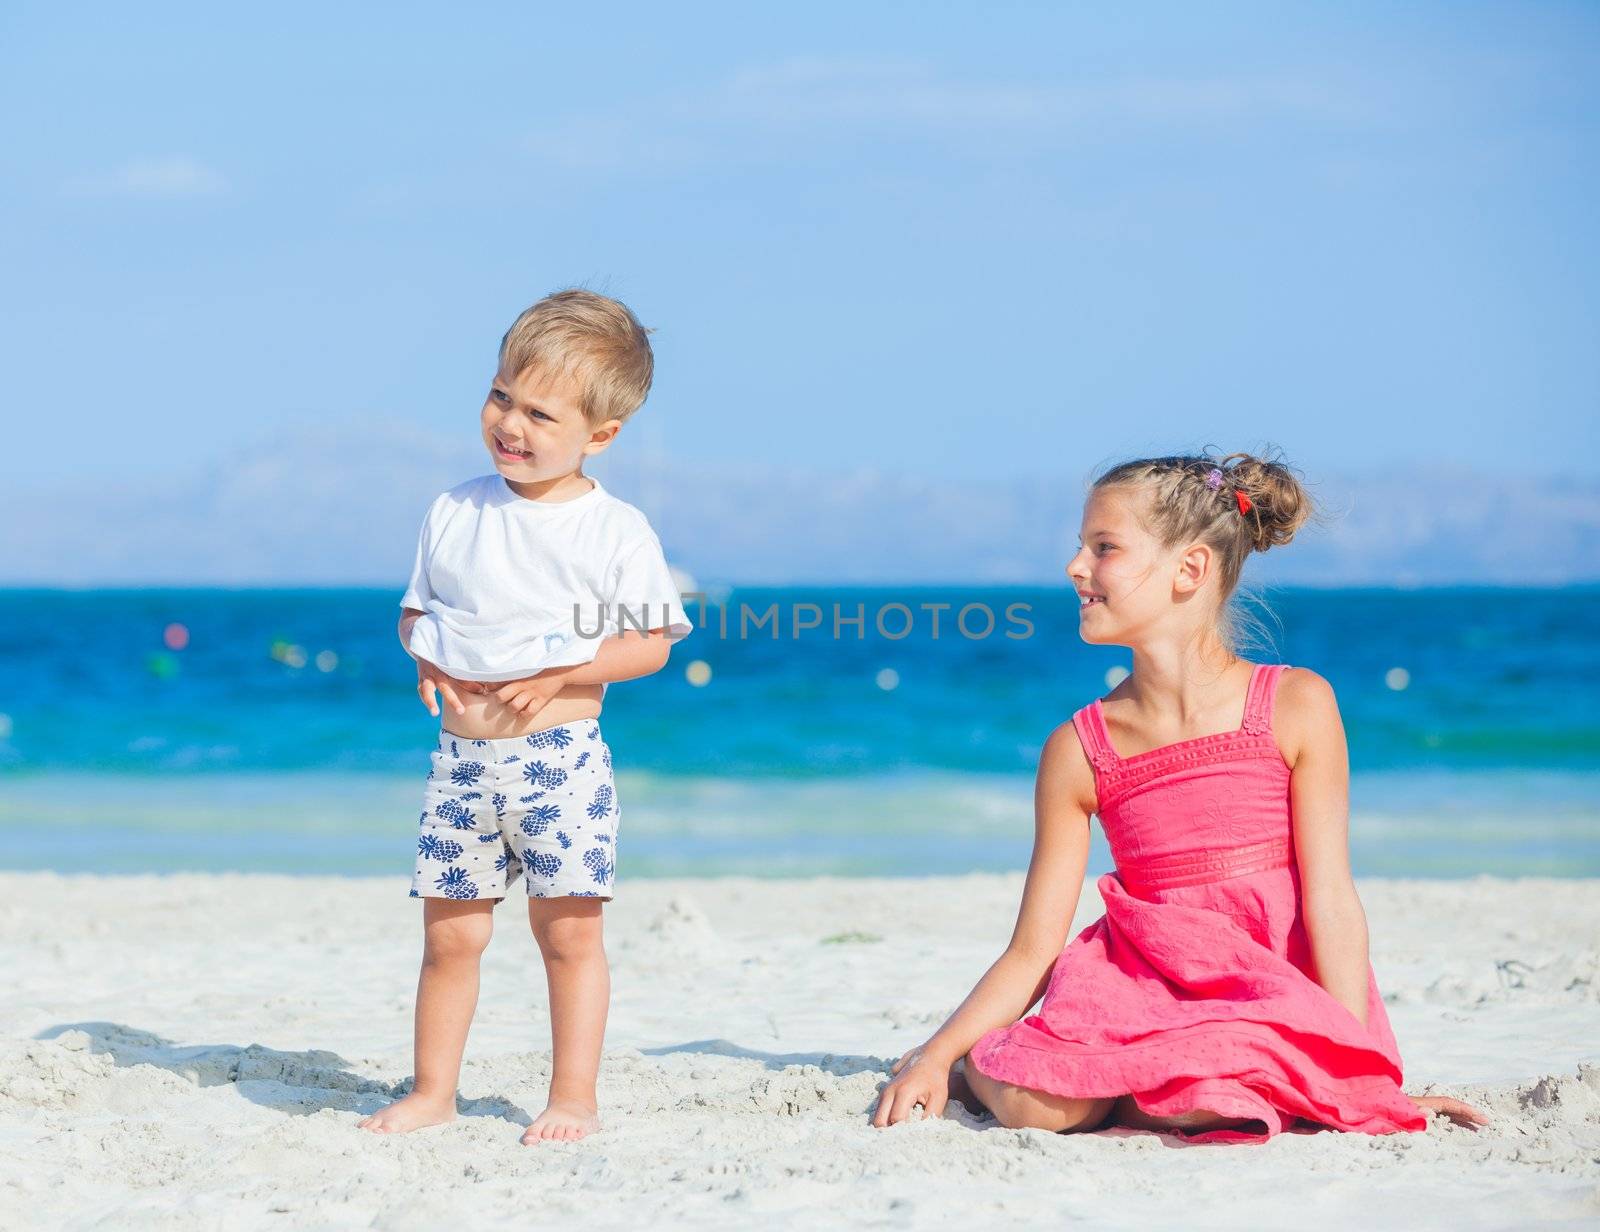 Boy with his sister walking on jetty by maxoliki